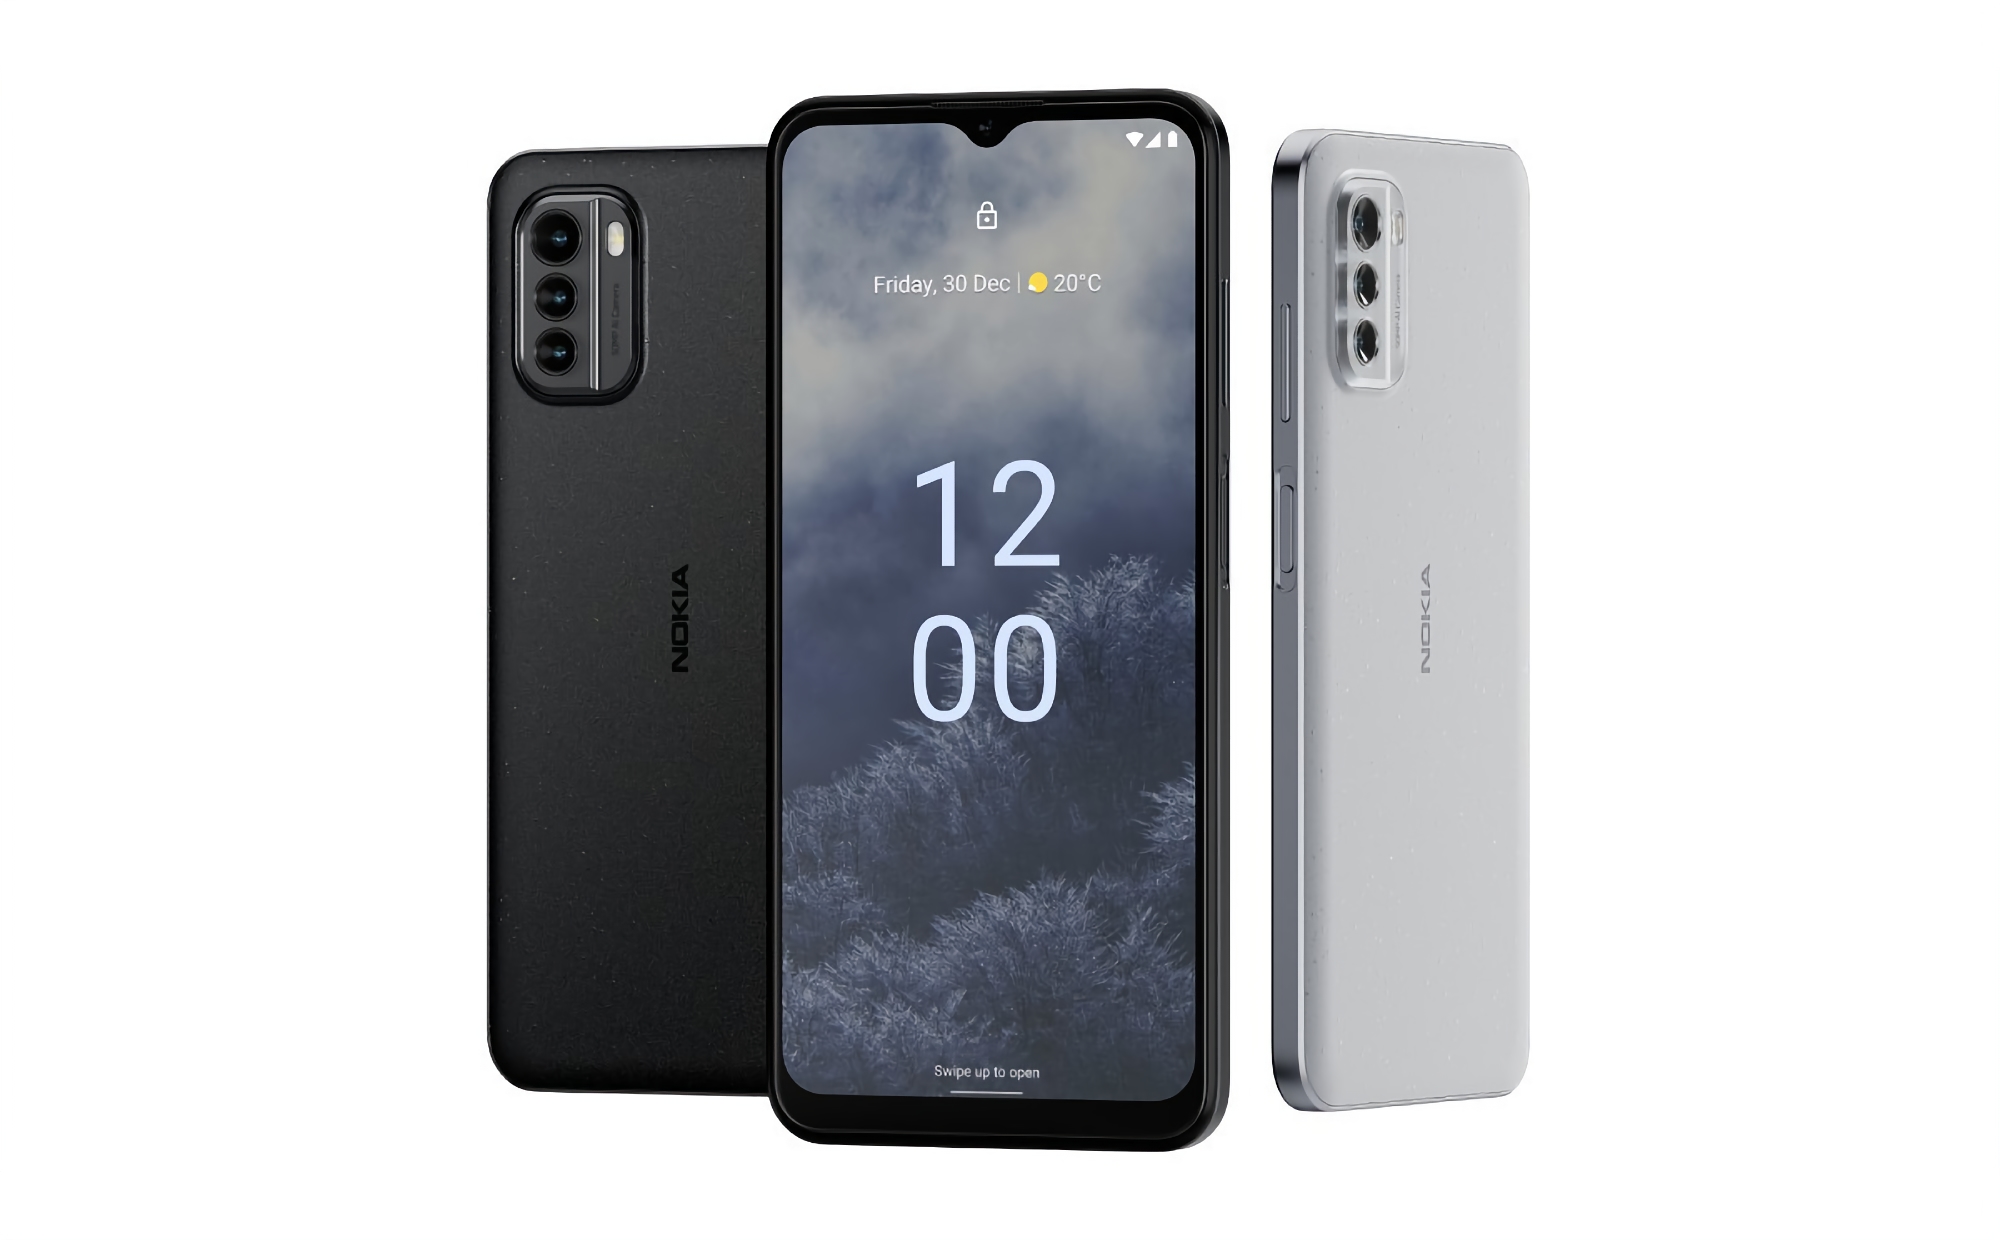 Nokia G60 5G: LCD screen at 120 Hz, Snapdragon 695 chip, 50 MP camera, IP52 protection and a 4,500 mAh battery with 20W charging for €320